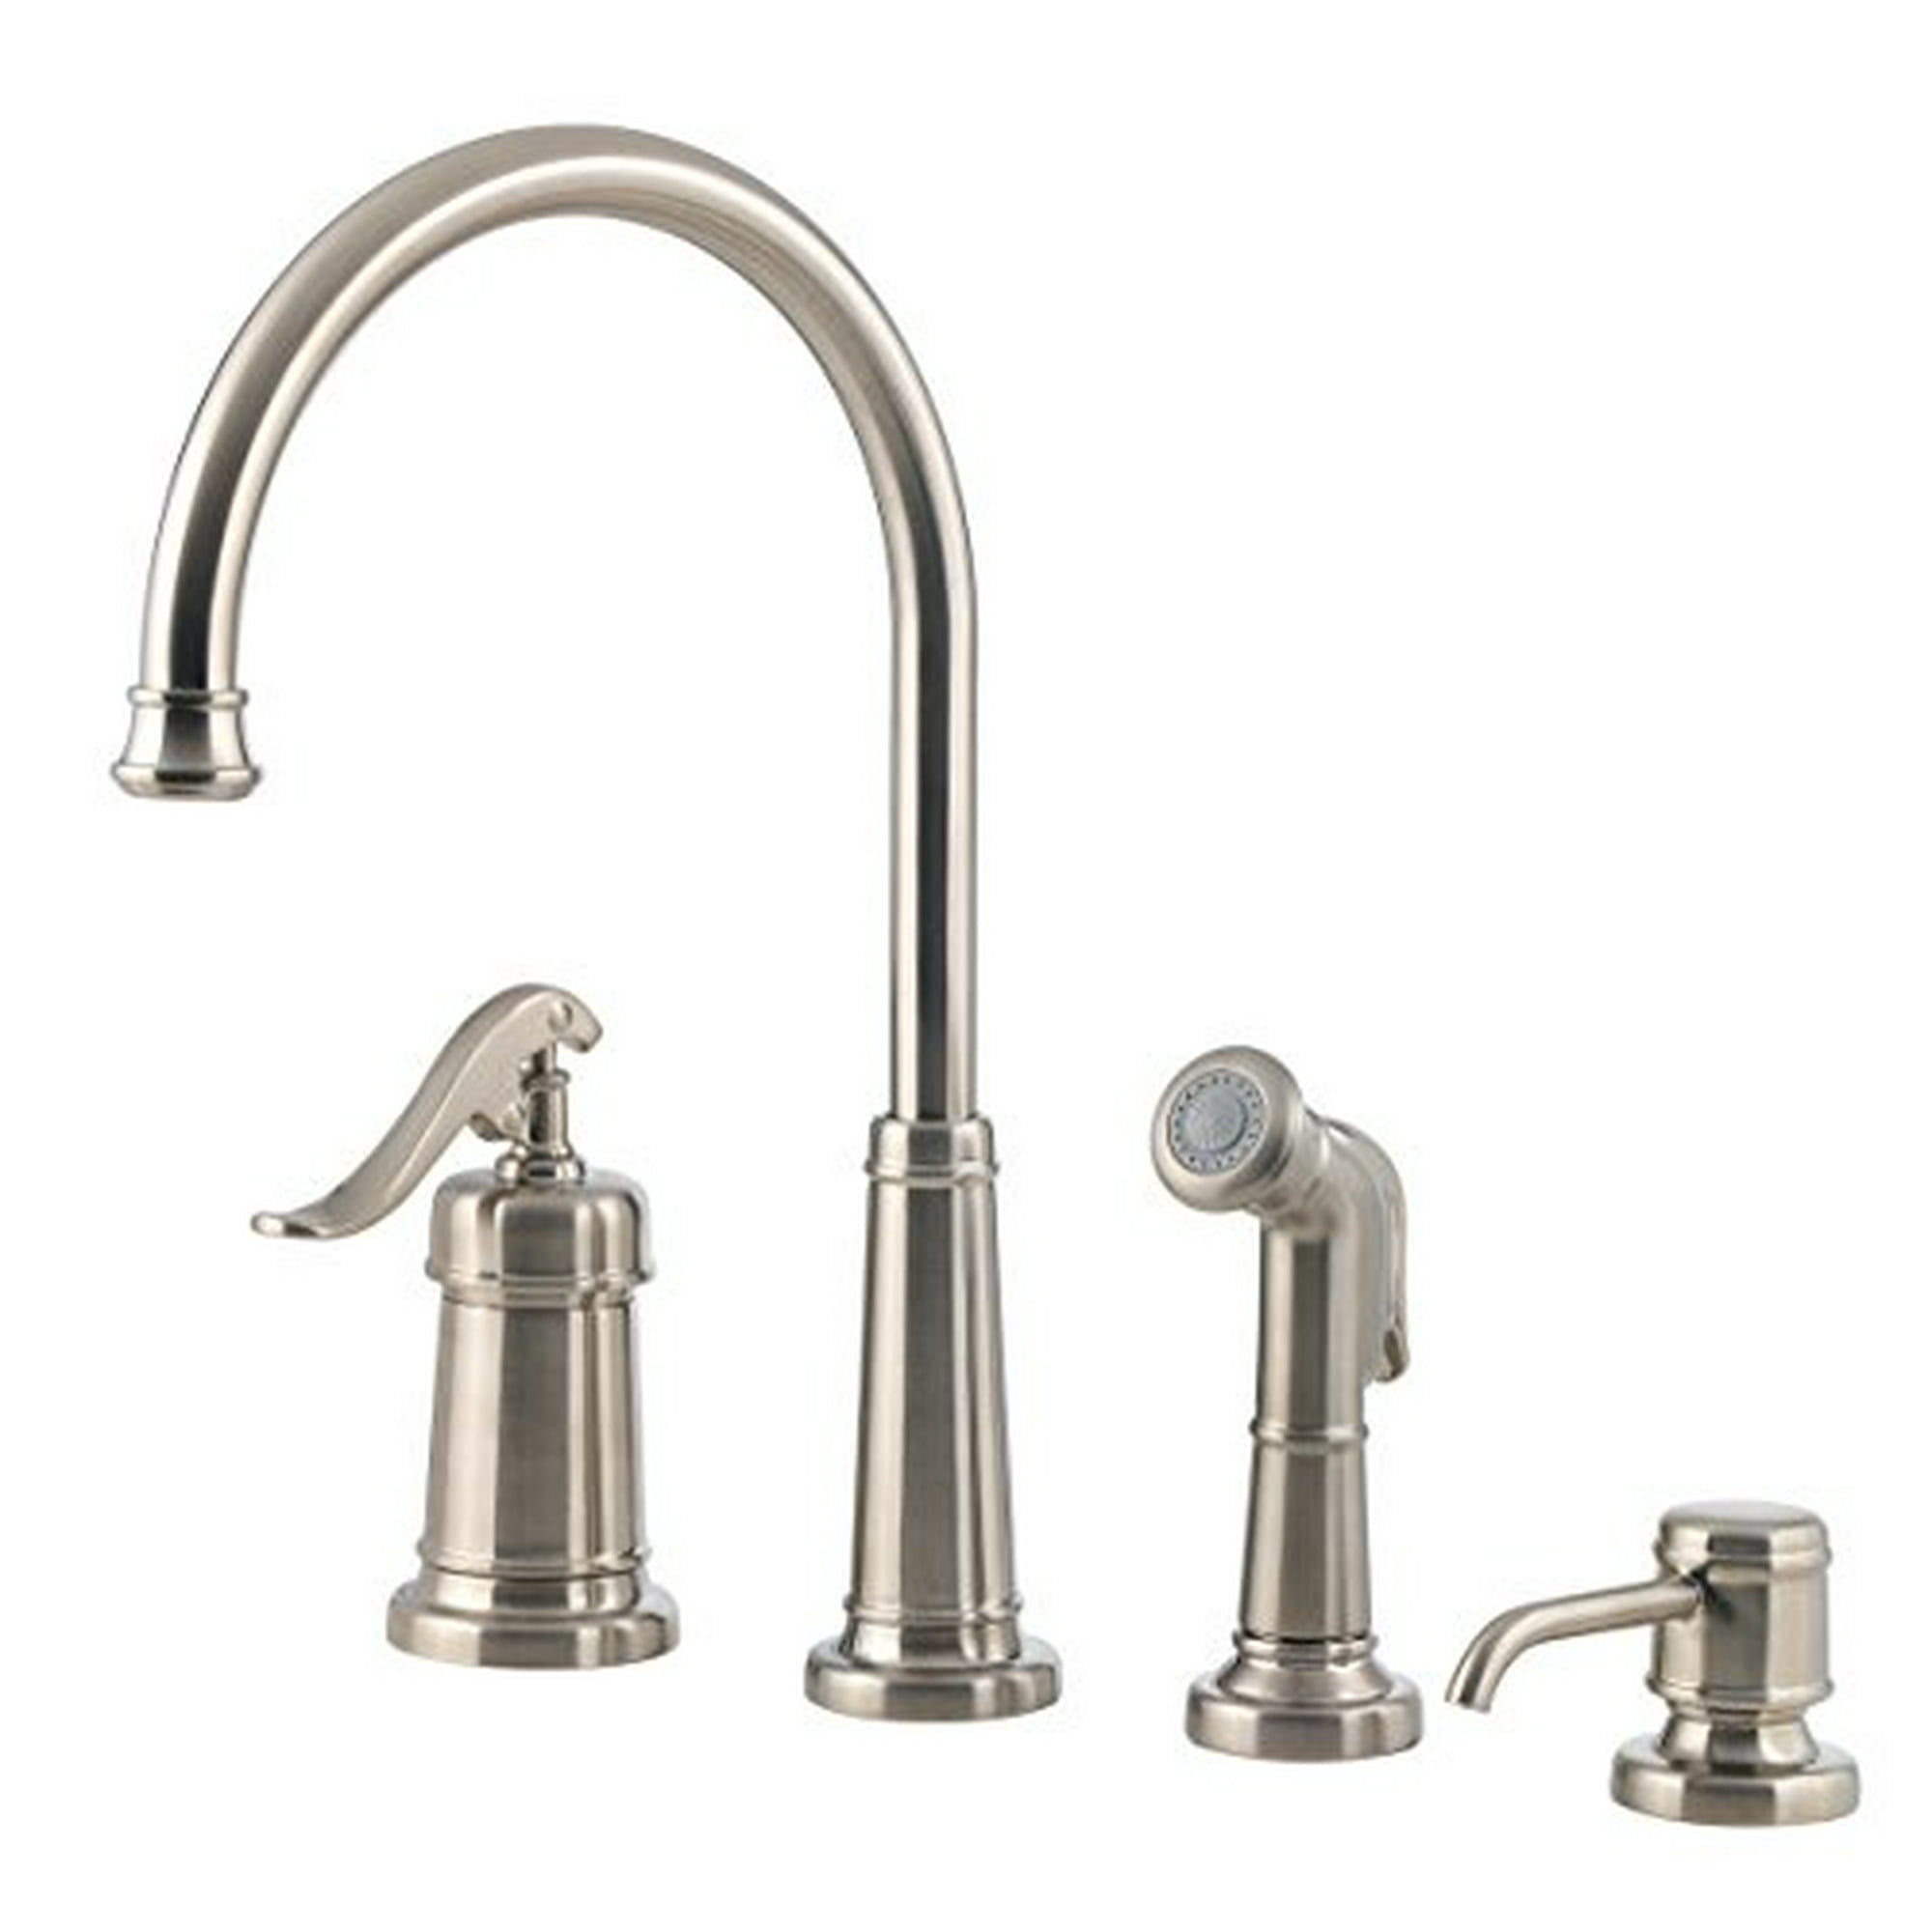 Pfister Lg264ypk Ashfield 1 Handle Kitchen Faucet With Side Spray Soap Dispenser Brushed Nickel 18 Gpm Walmart Canada